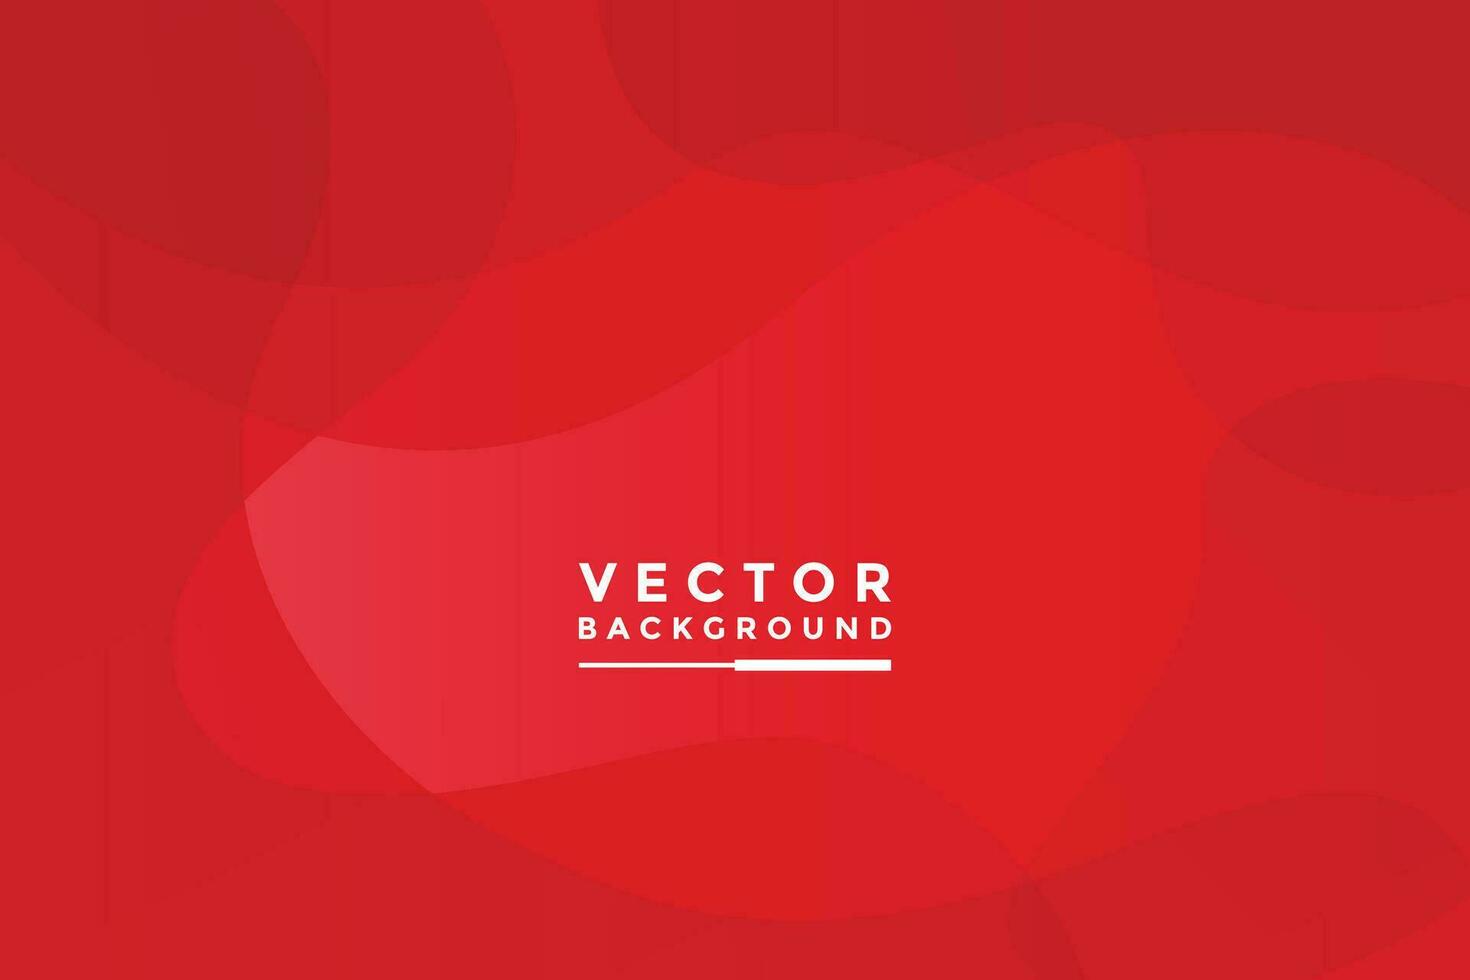 Red background vector illustration lighting effect graphic for text and message board design infographic.